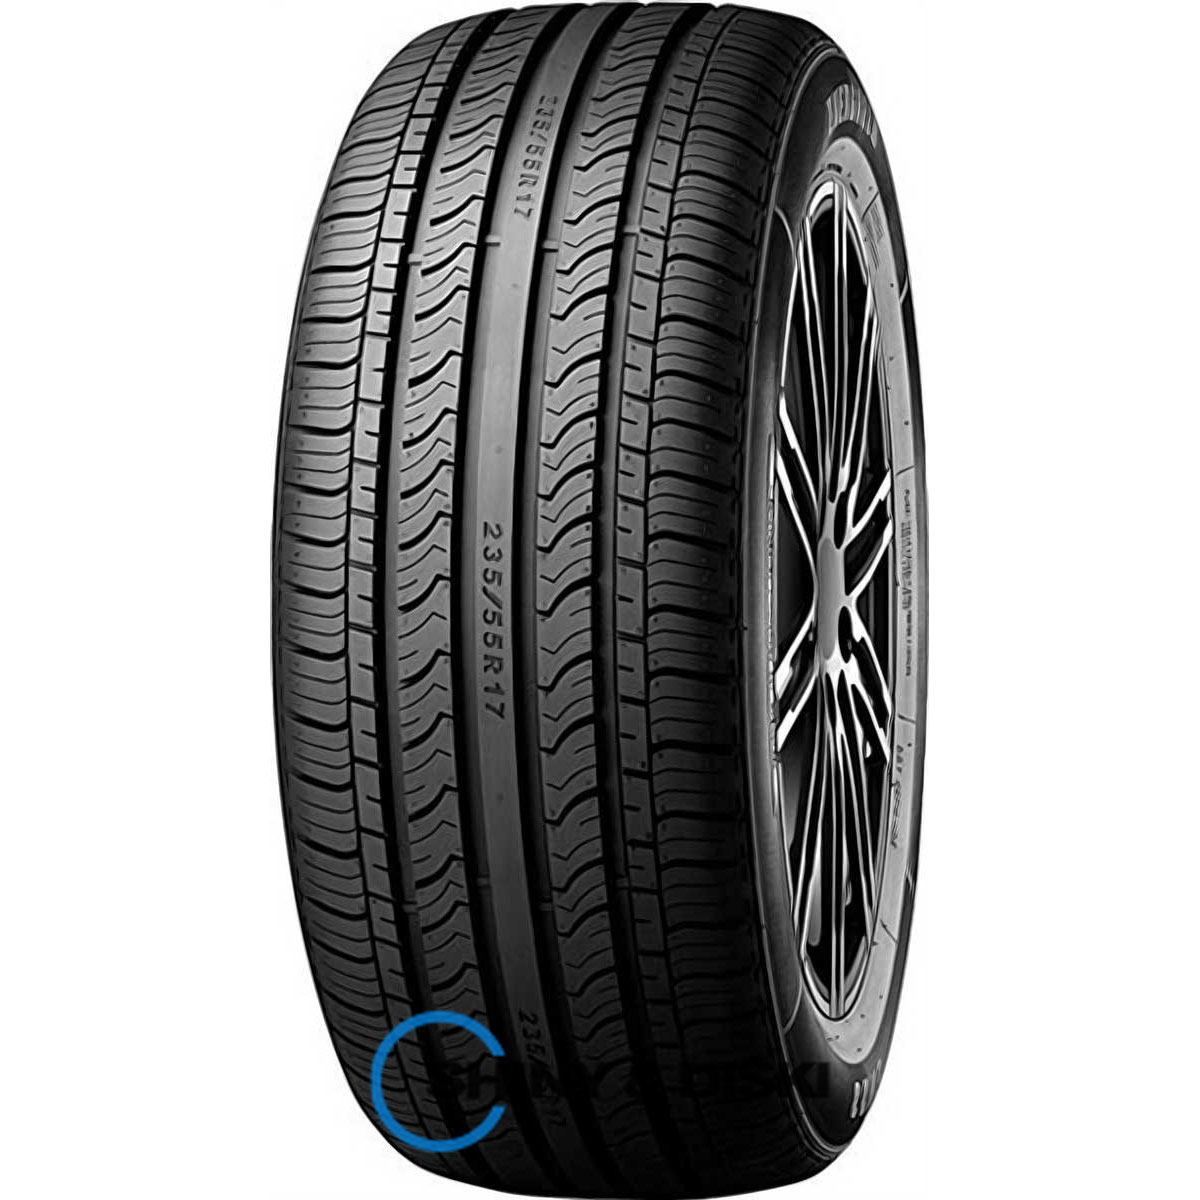 evergreen eh23 195/65 r15 95t